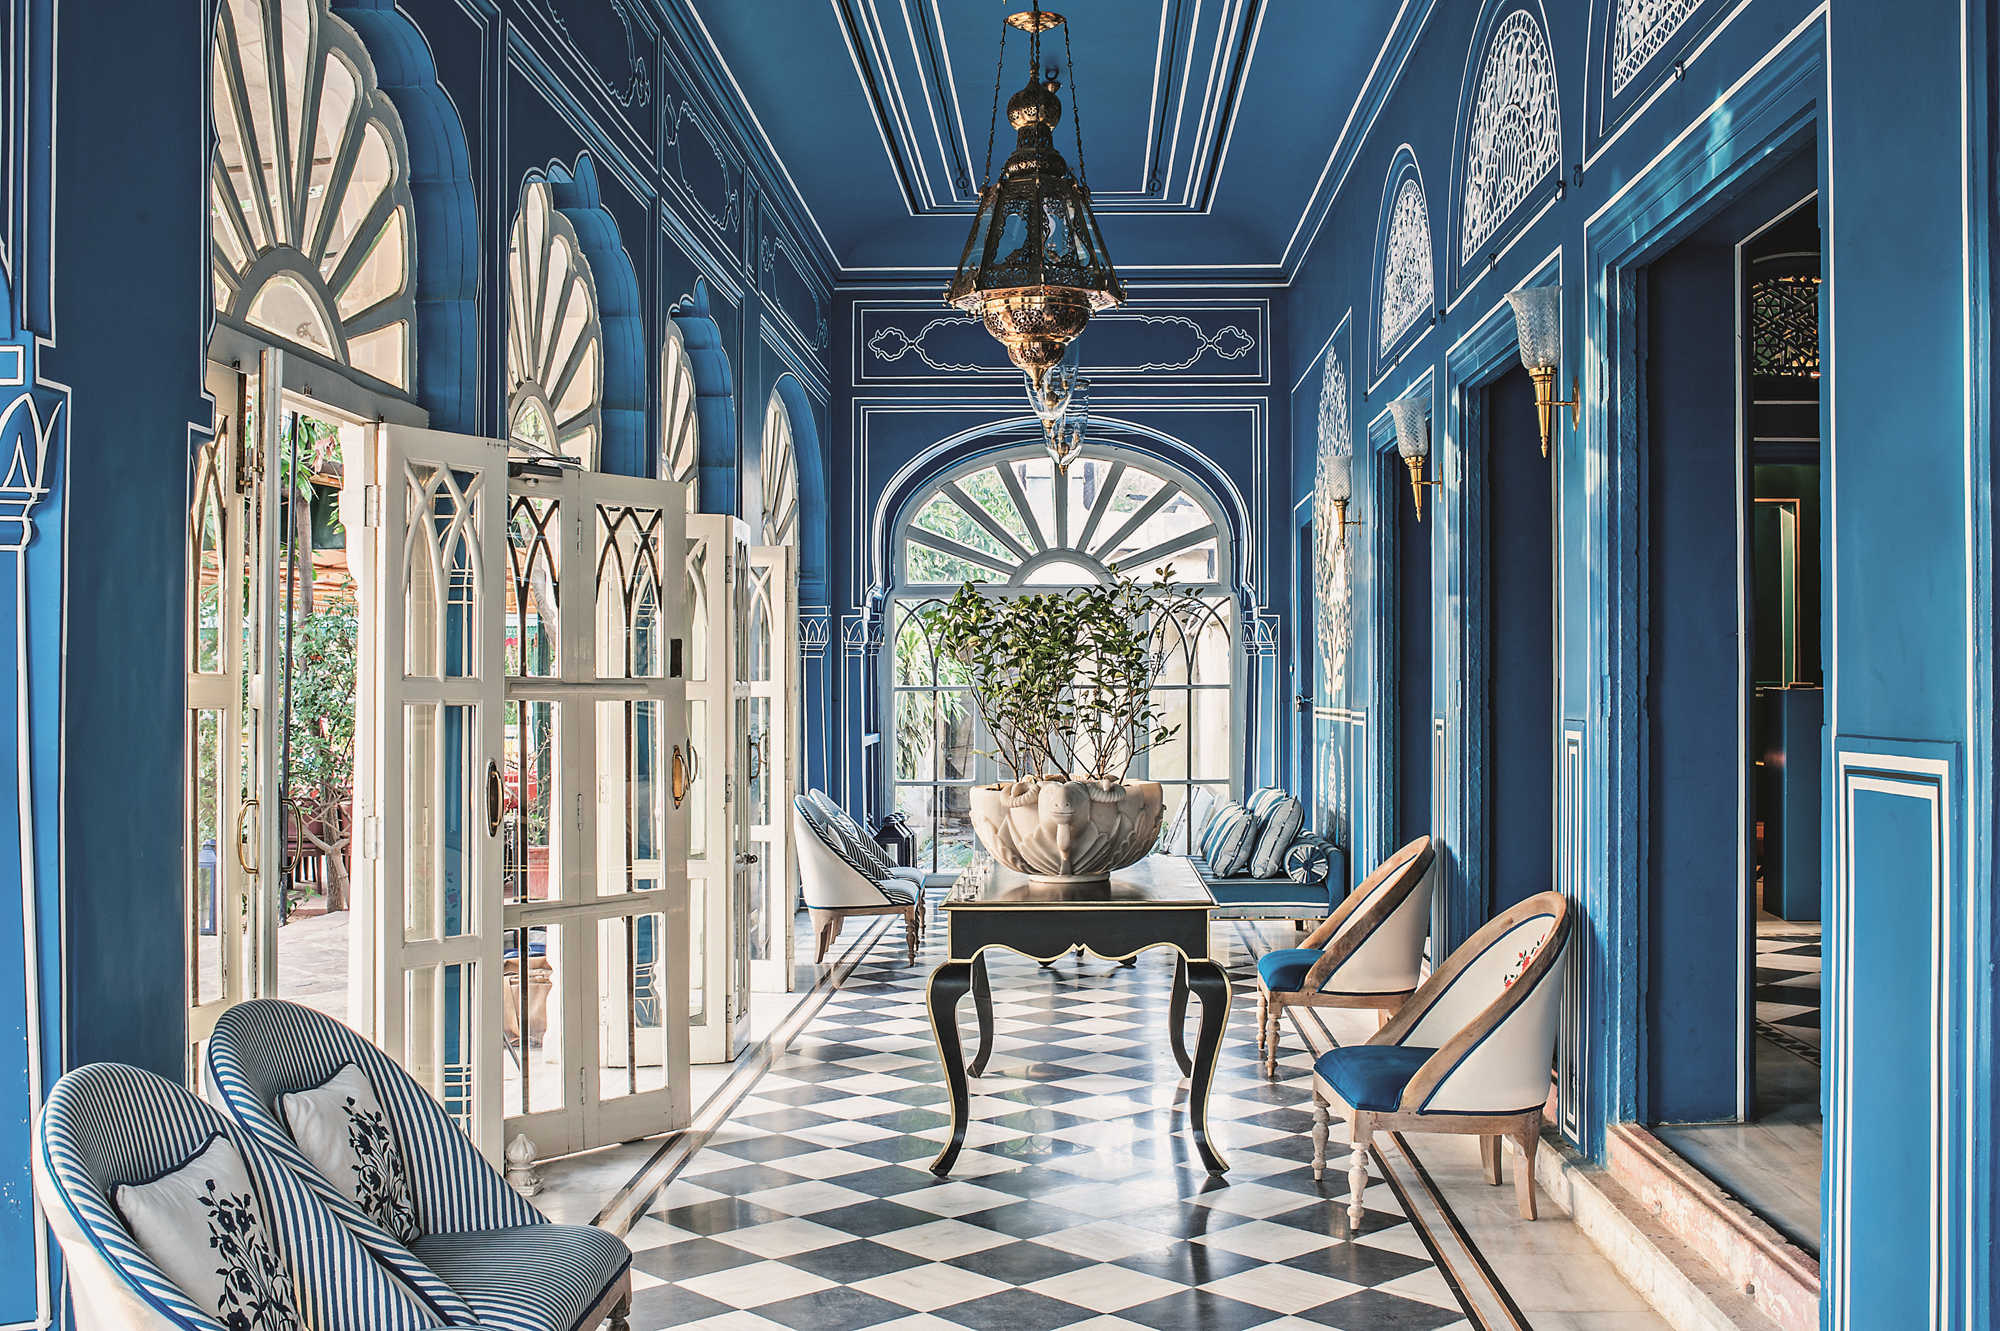 Marie-Anne Oudejans: Bar and Caffé Palladio, Jaipur, India, 2013. Photo by Henry Wilson, courtesy of Marie-Anne Oudejans